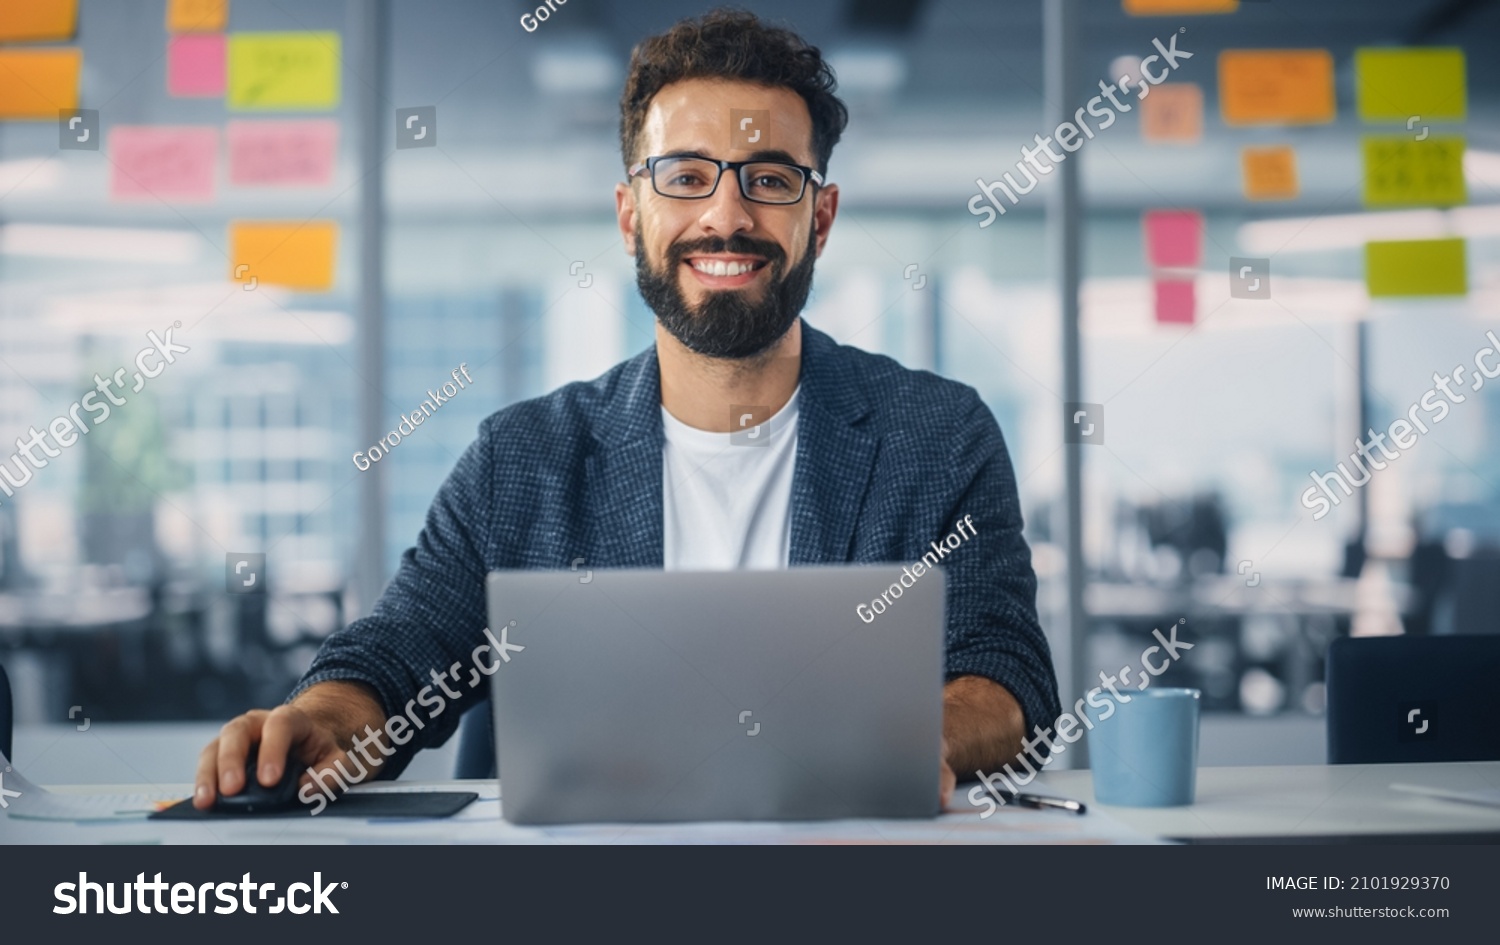 Modern Office: Portrait of Stylish Hispanic Businessman Works on Laptop, Does Data Analysis and Creative Designer, Looks at Camera and Smiles. Digital Entrepreneur Works on e-Commerce Startup Project #2101929370